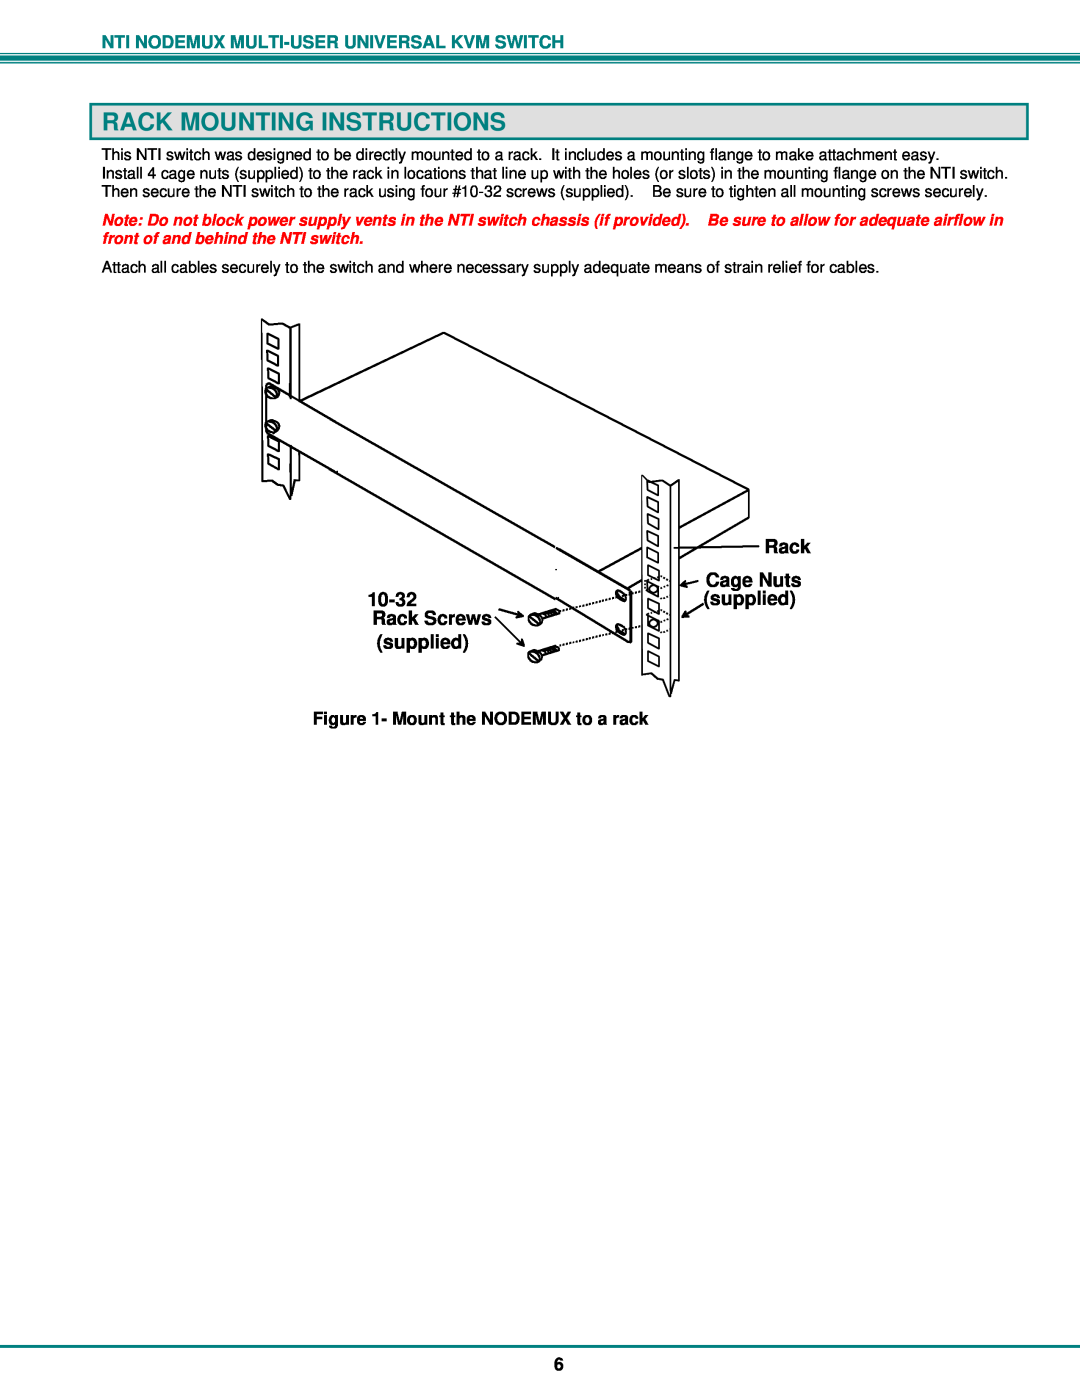 Network Technologies ST-nXm-U operation manual Rack Mounting Instructions, Rack Screws supplied, Rack Cage Nuts supplied 